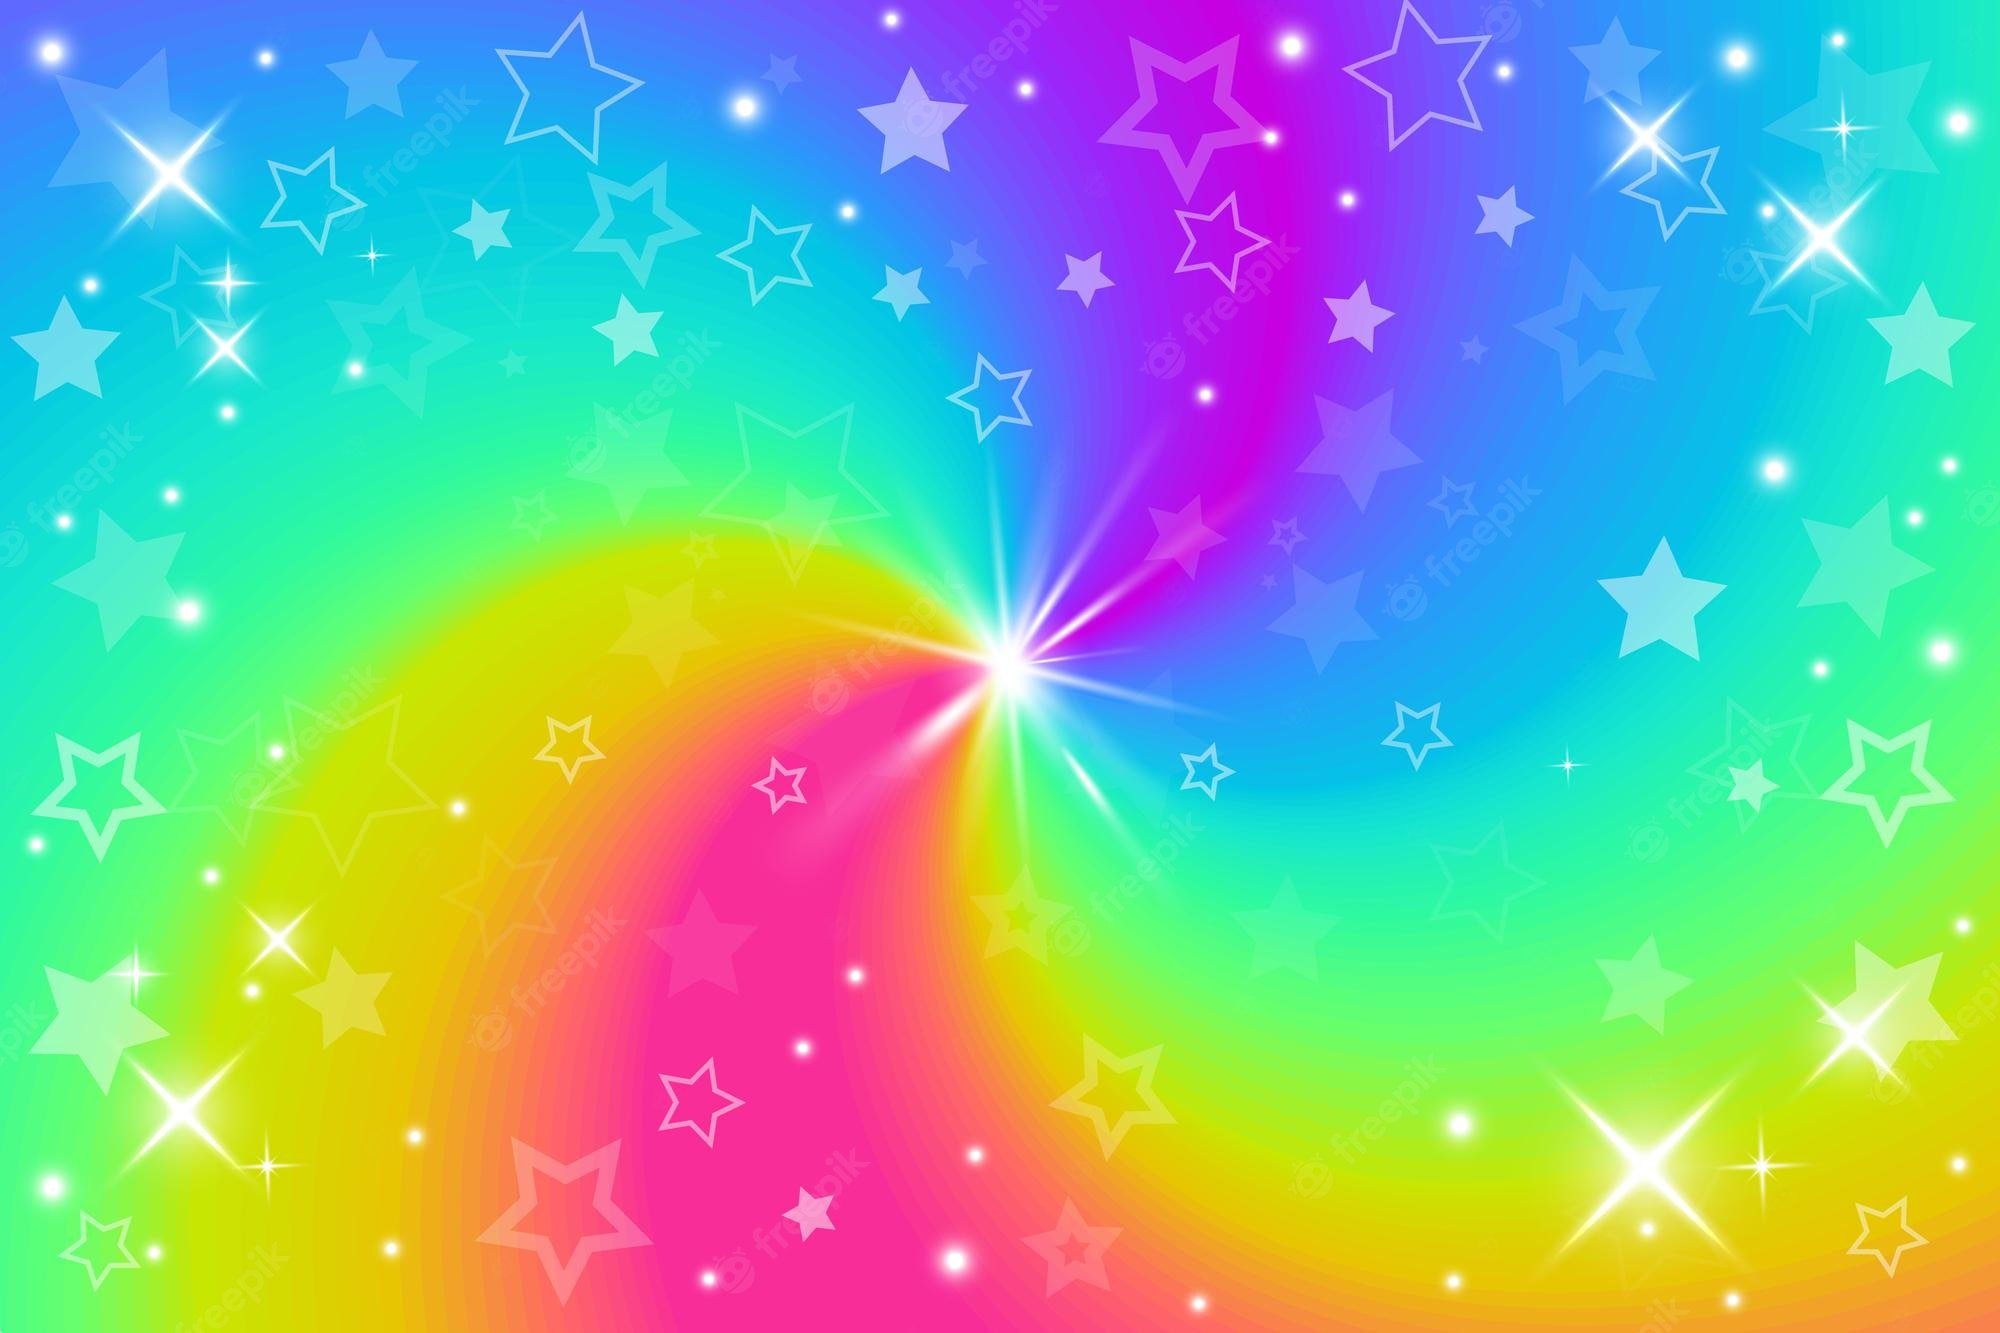 Premium Vector. Rainbow swirl background with stars radial gradient rainbow of twisted spiral